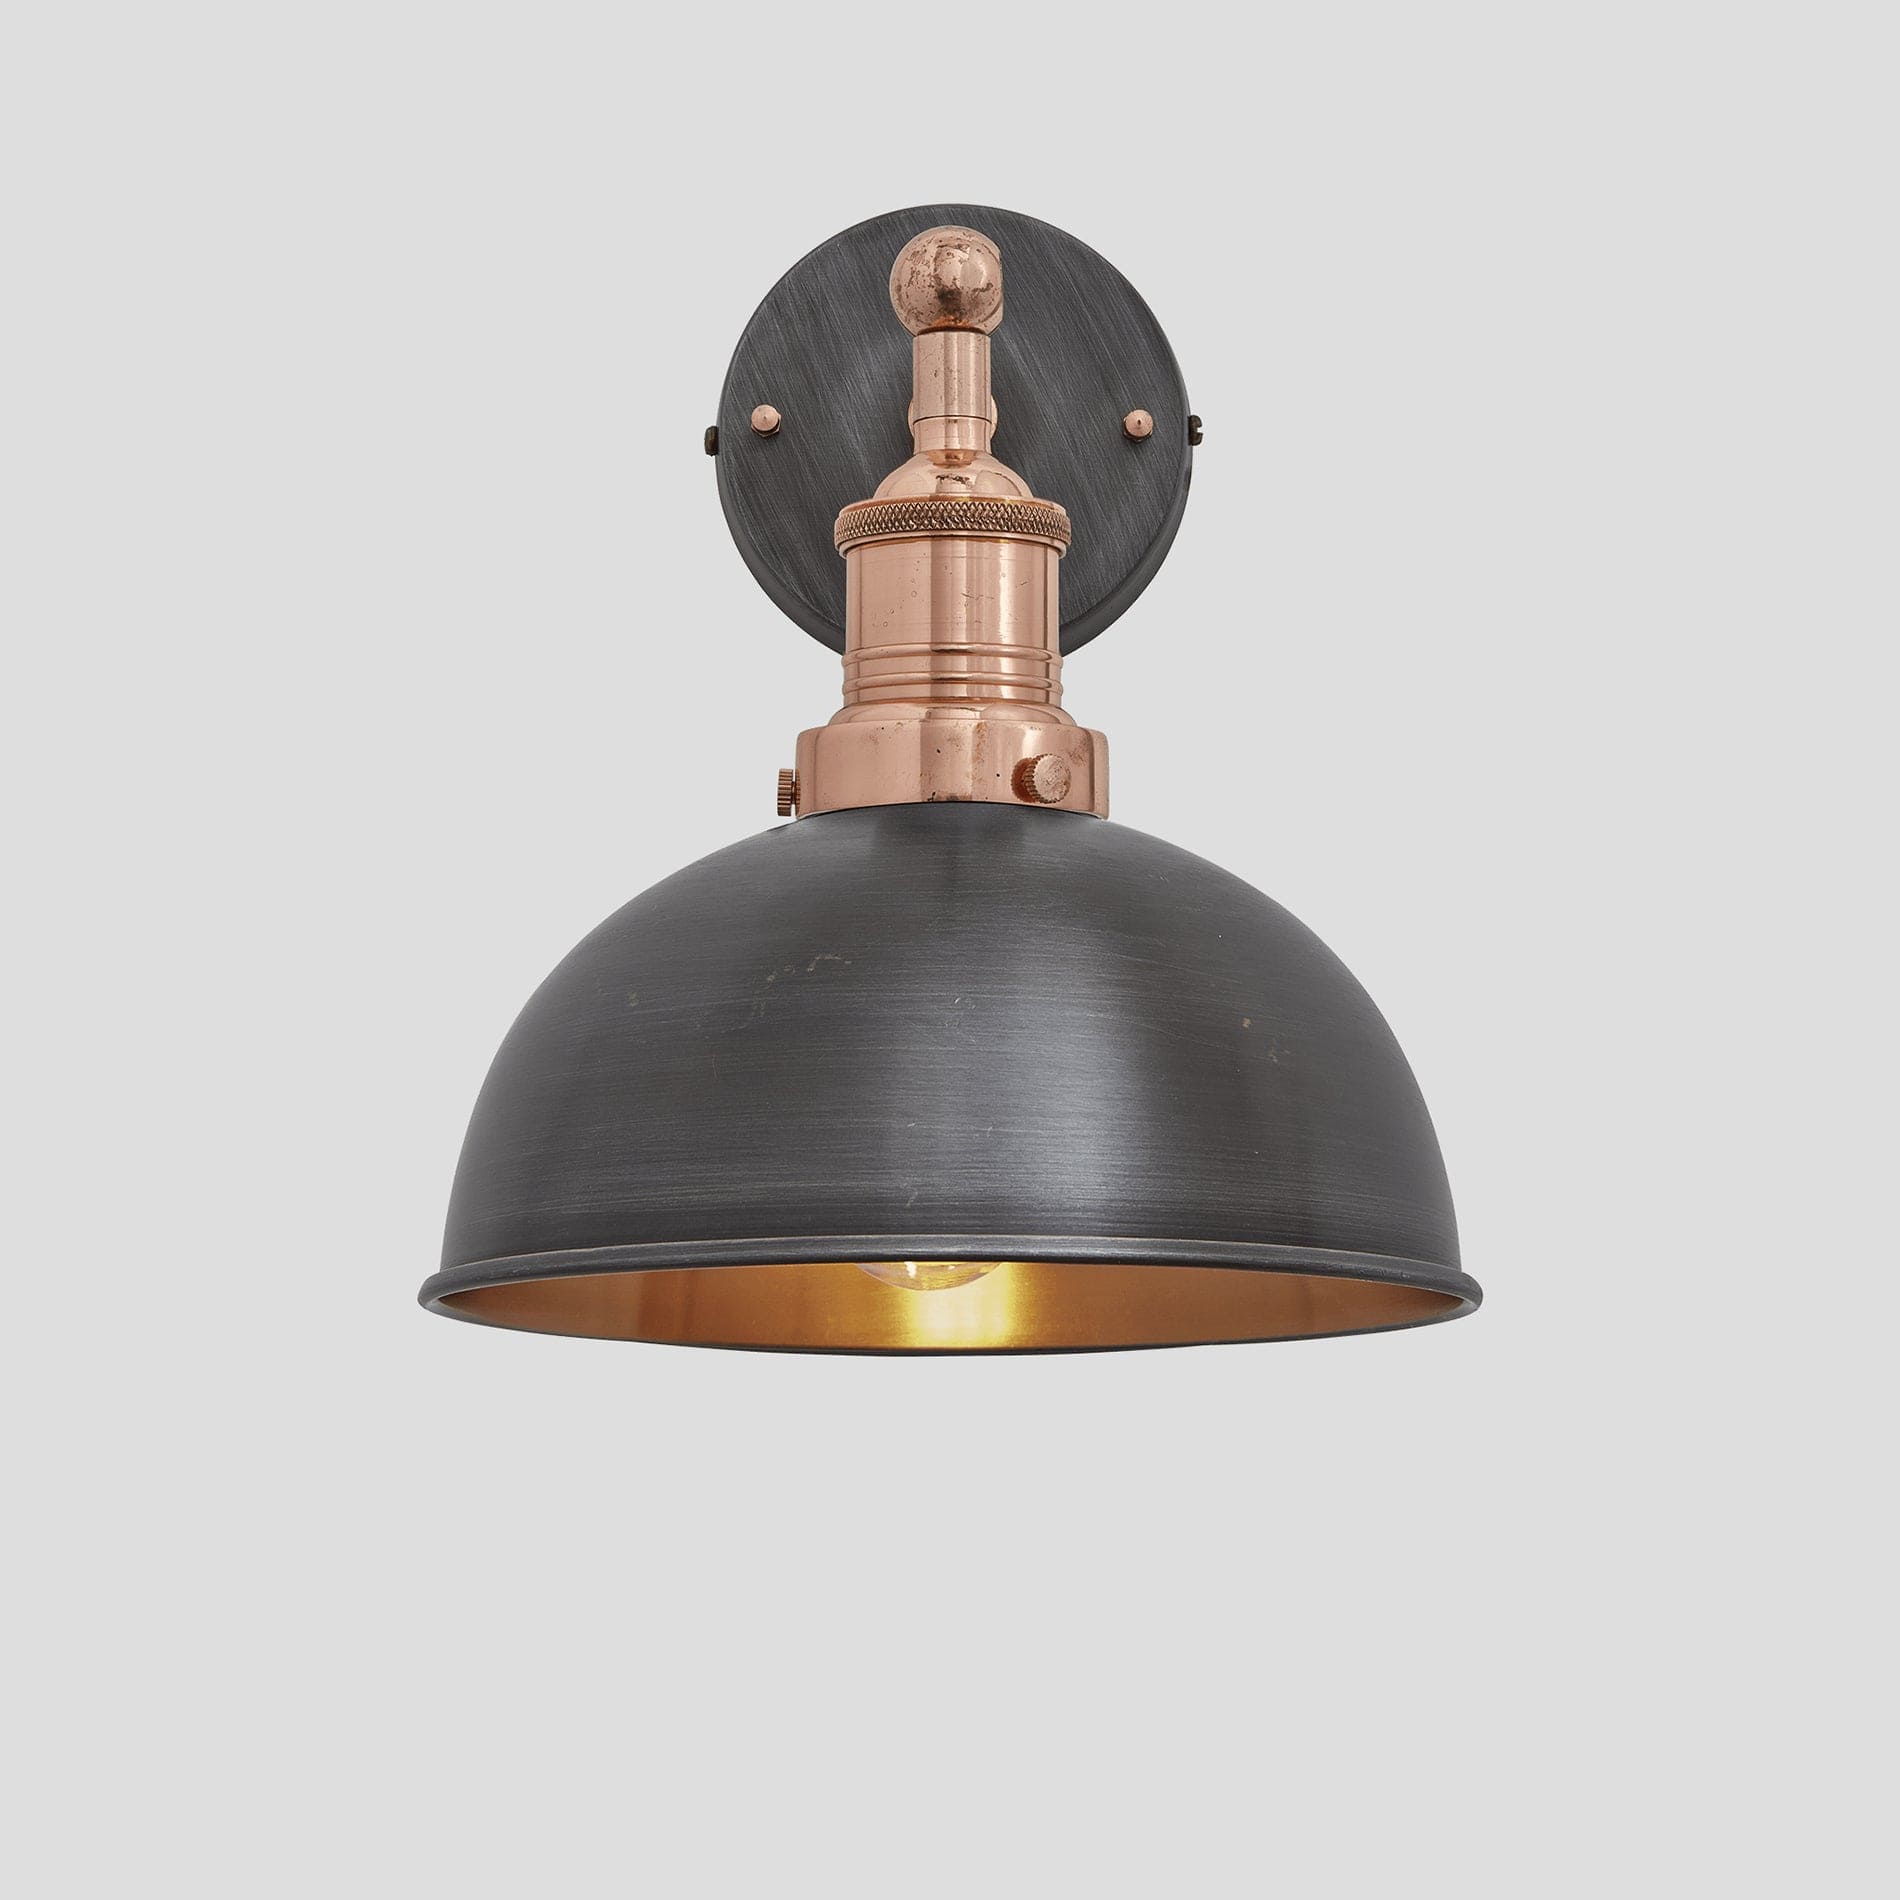 Brooklyn Dome Wall Light - 8 Inch - Pewter & Copper Industville BR-DWL8-CP-CH